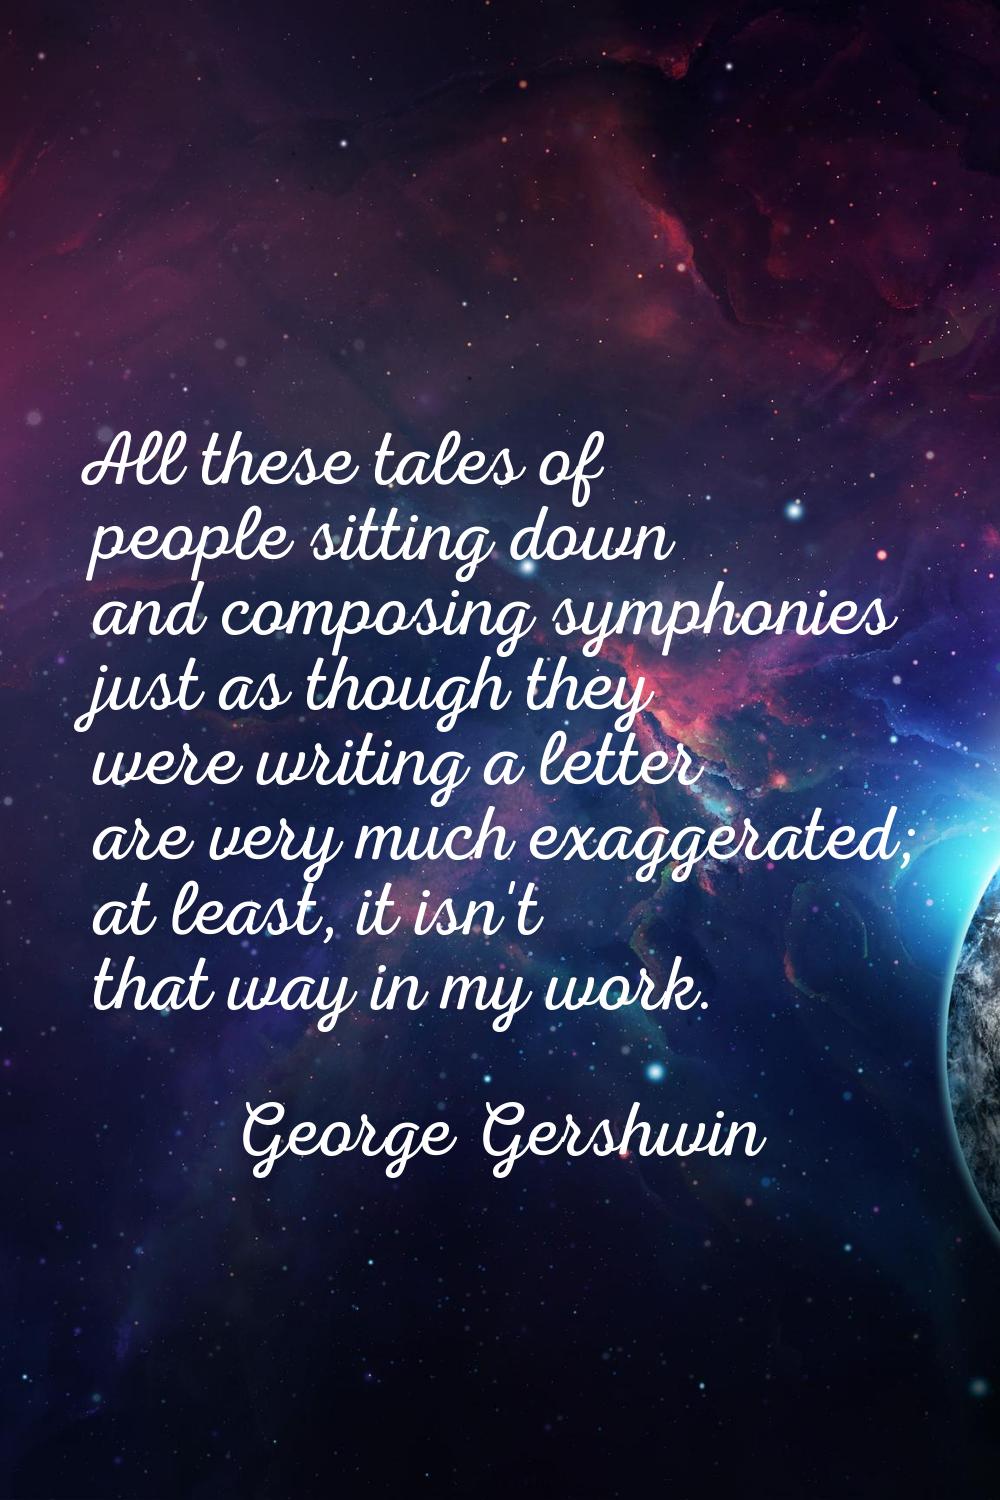 All these tales of people sitting down and composing symphonies just as though they were writing a 